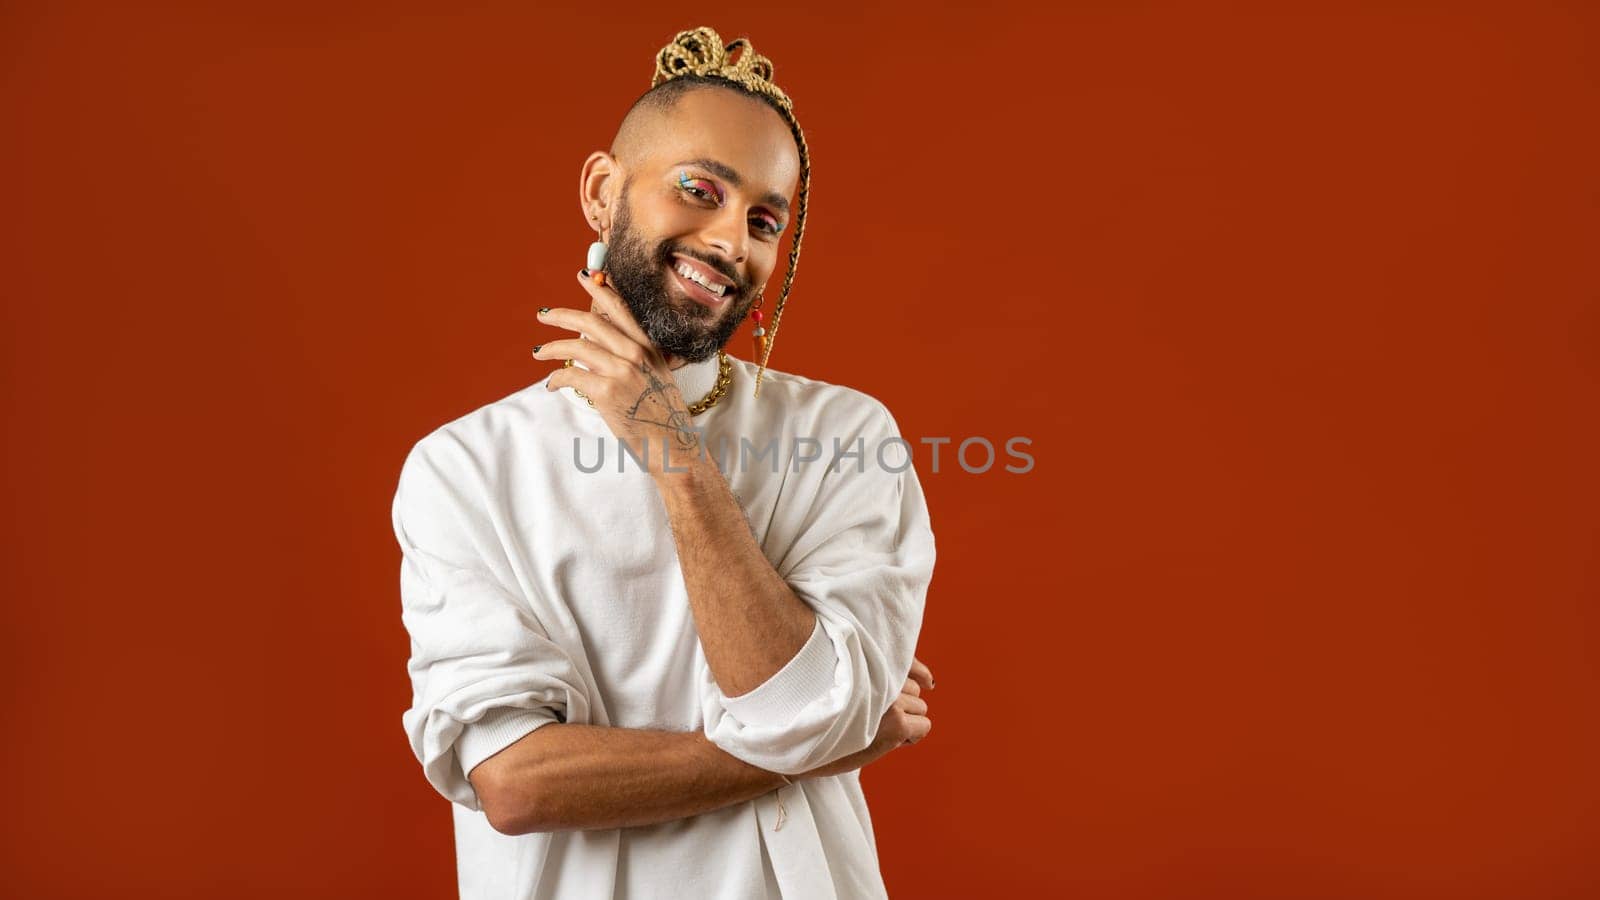 Make up artist. Black afro-american gay man with bright make-up in white clothes smiling looking at camera isolated on red background studio portrait Fashion makeup lgbt concept. Banner format